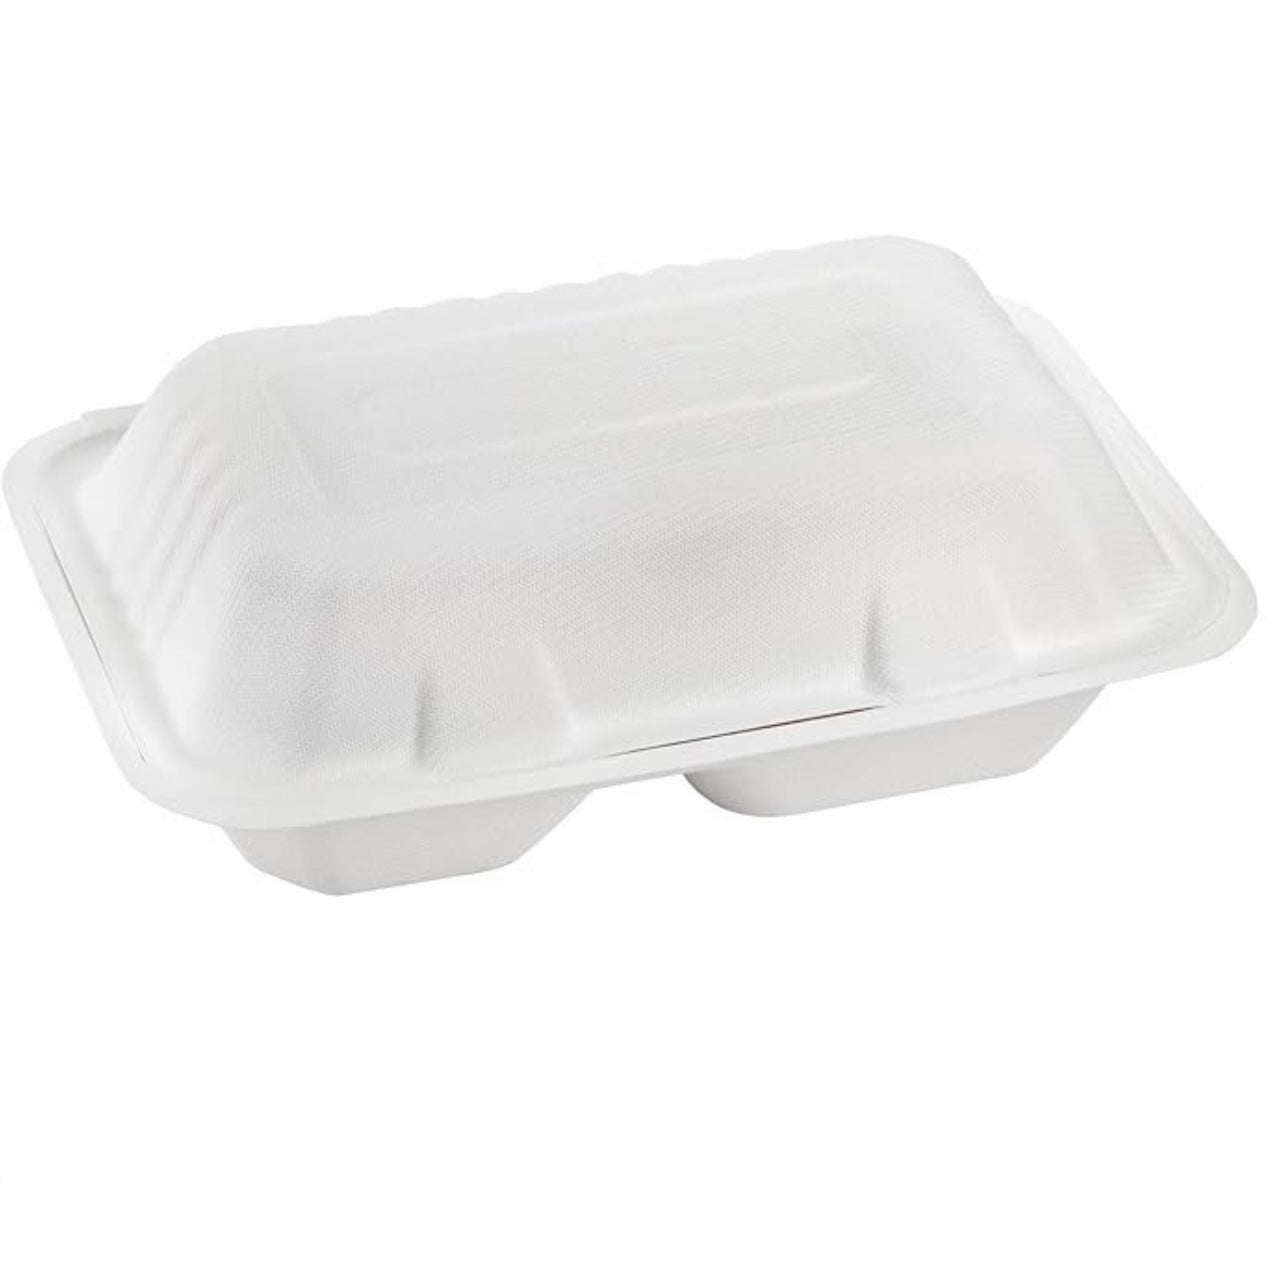 9" x 6" x 3" Compostable Sugarcane / Bagasse 2 Compartment Take-Out Container - 200/Case